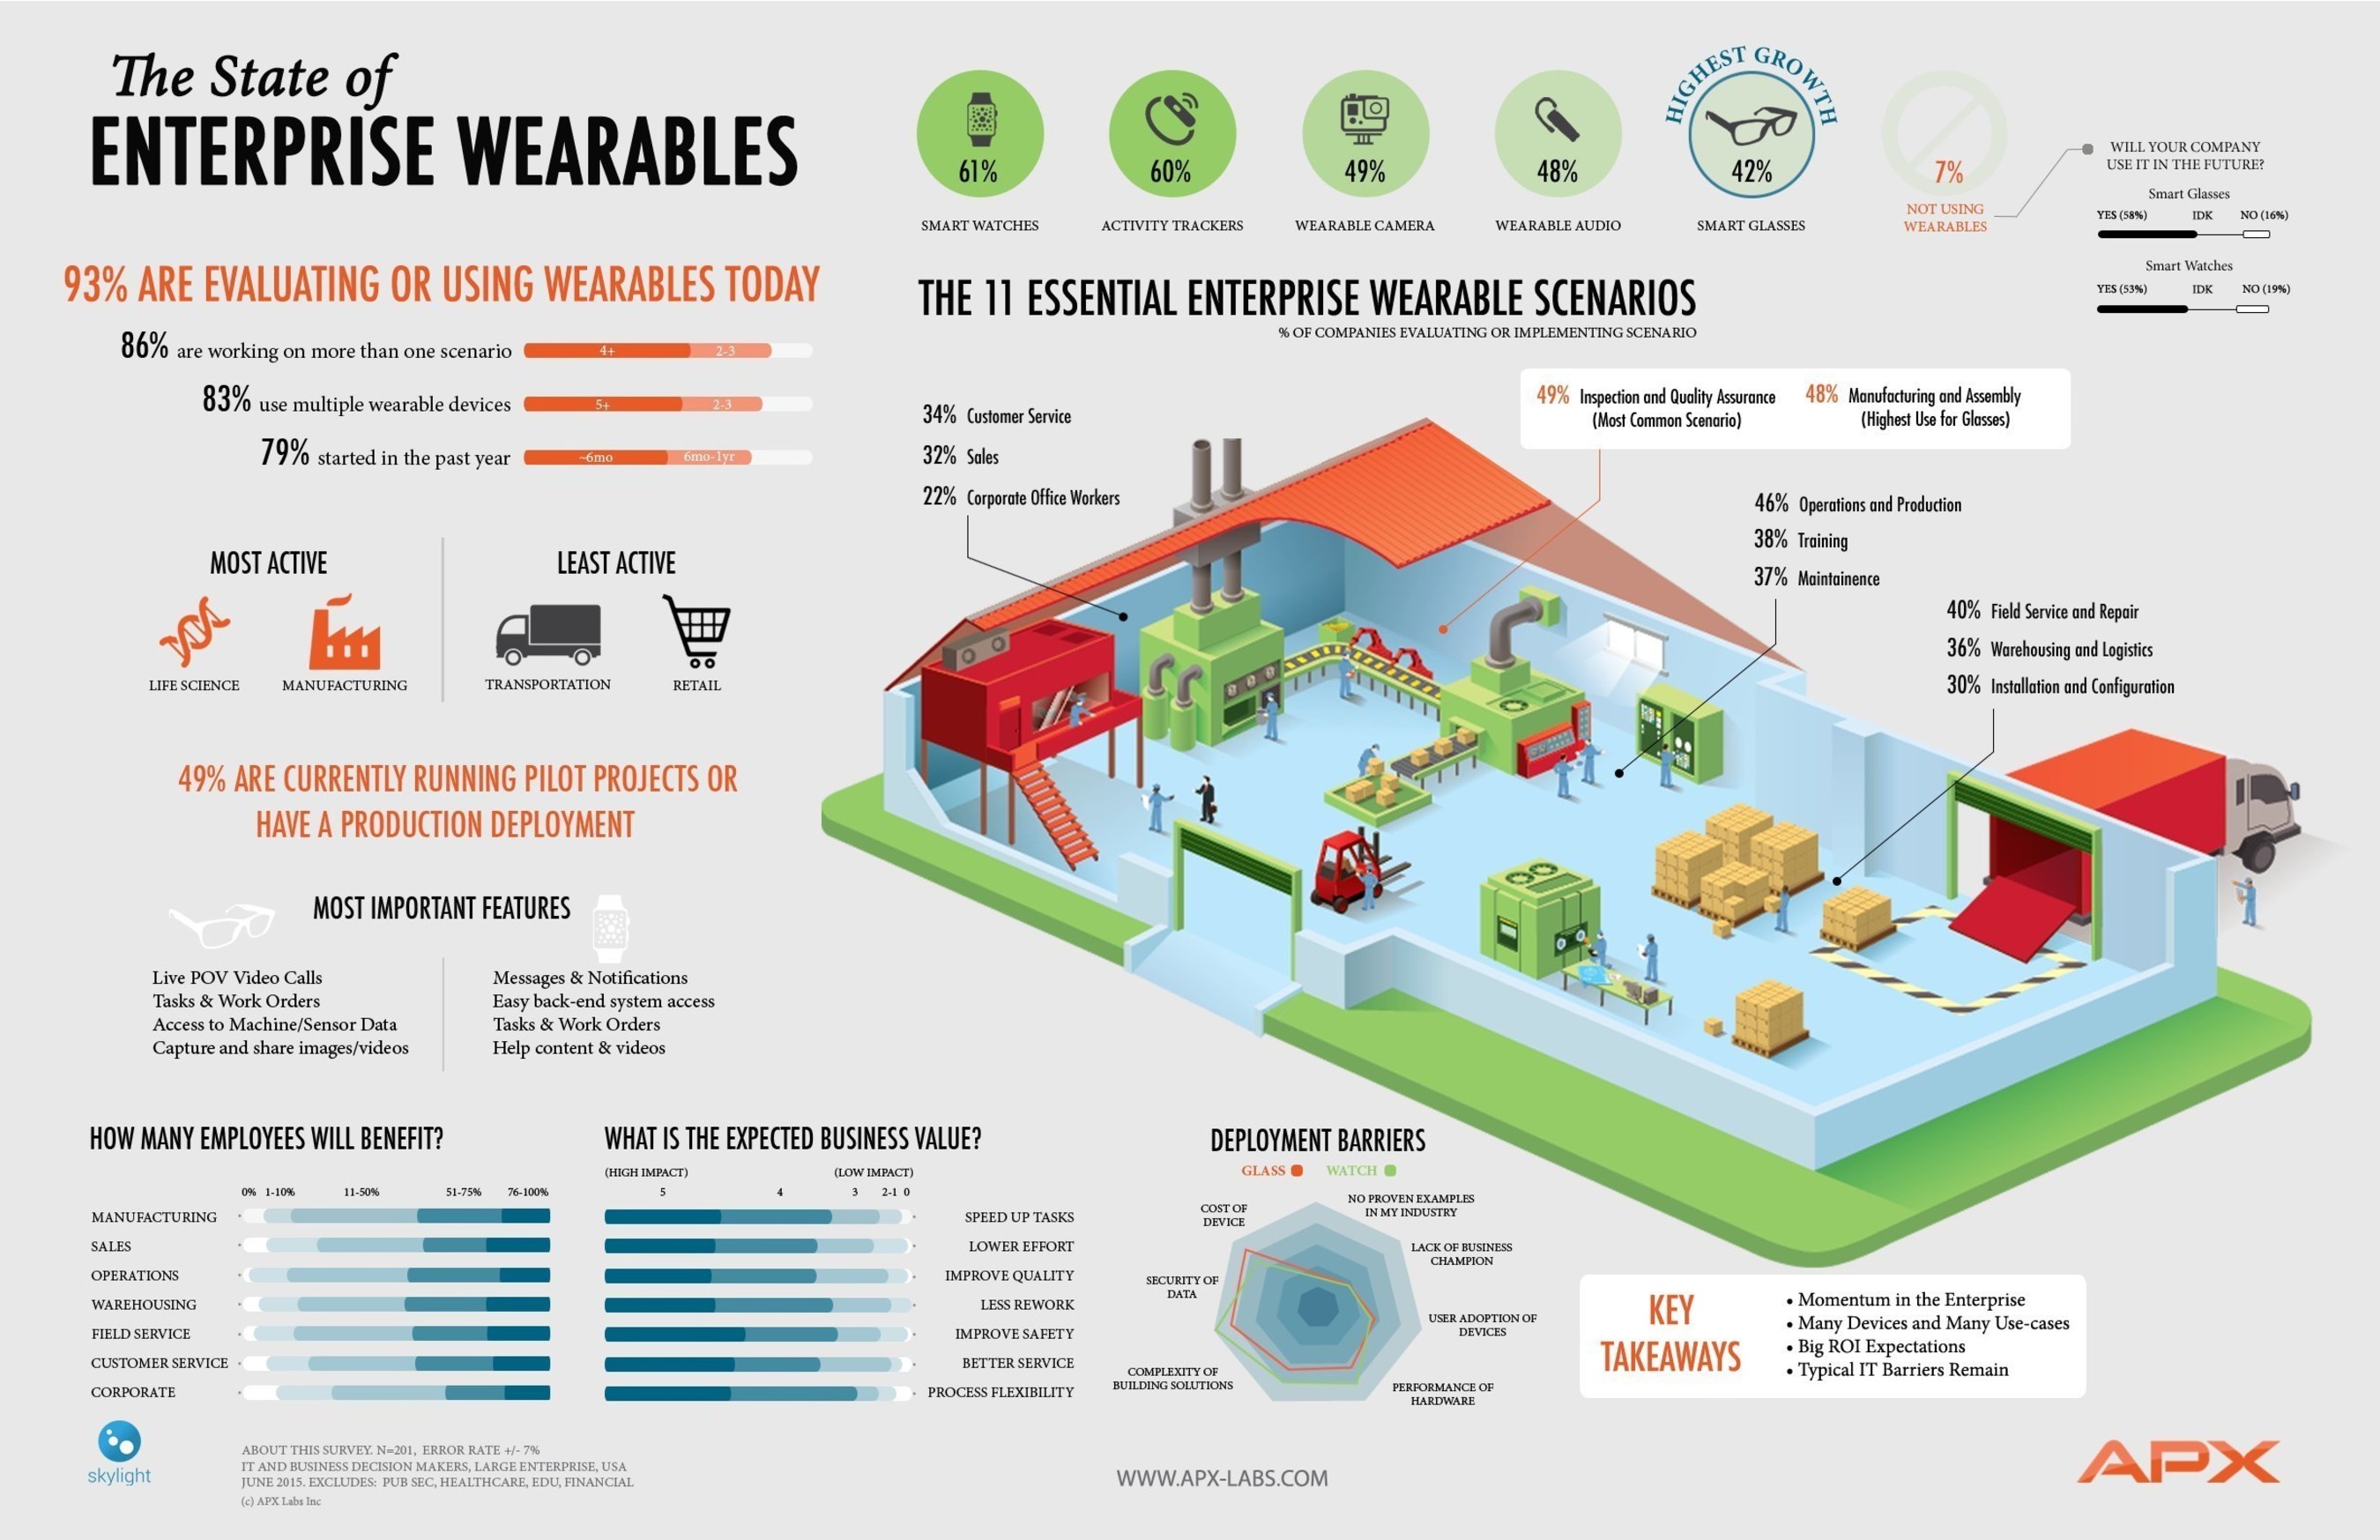 The State of Enterprise Wearables